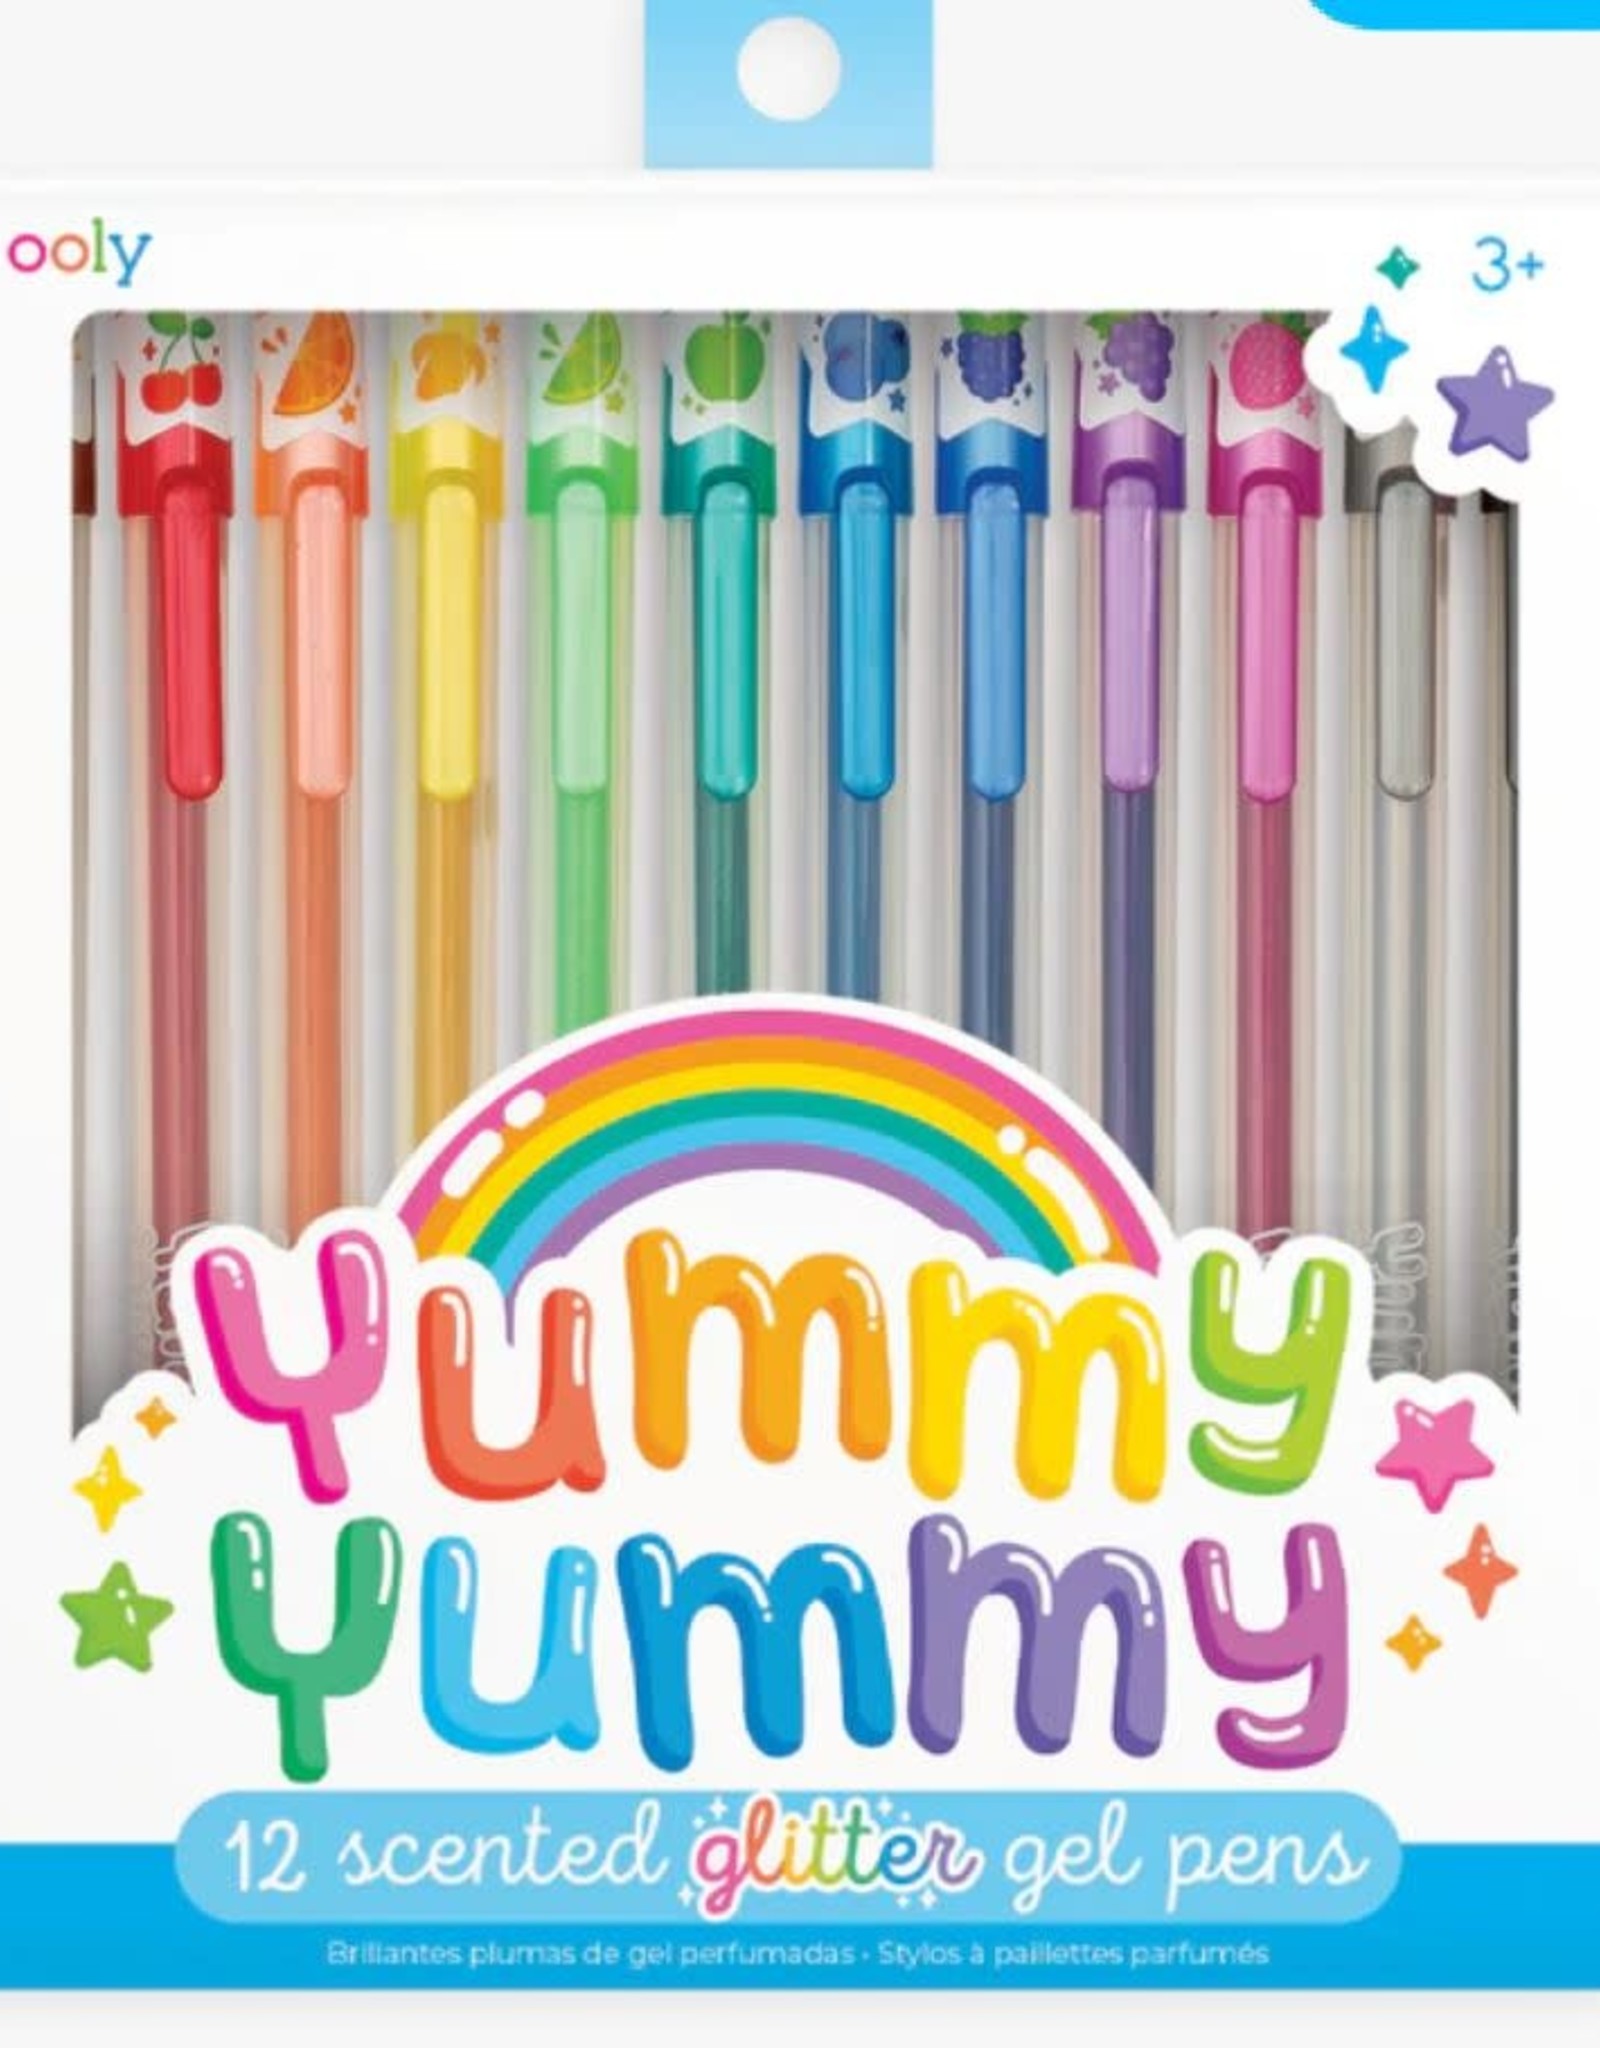 Yummy Yummy 12 Scented Glitter Gel Pens - Lets Play: Games & Toys